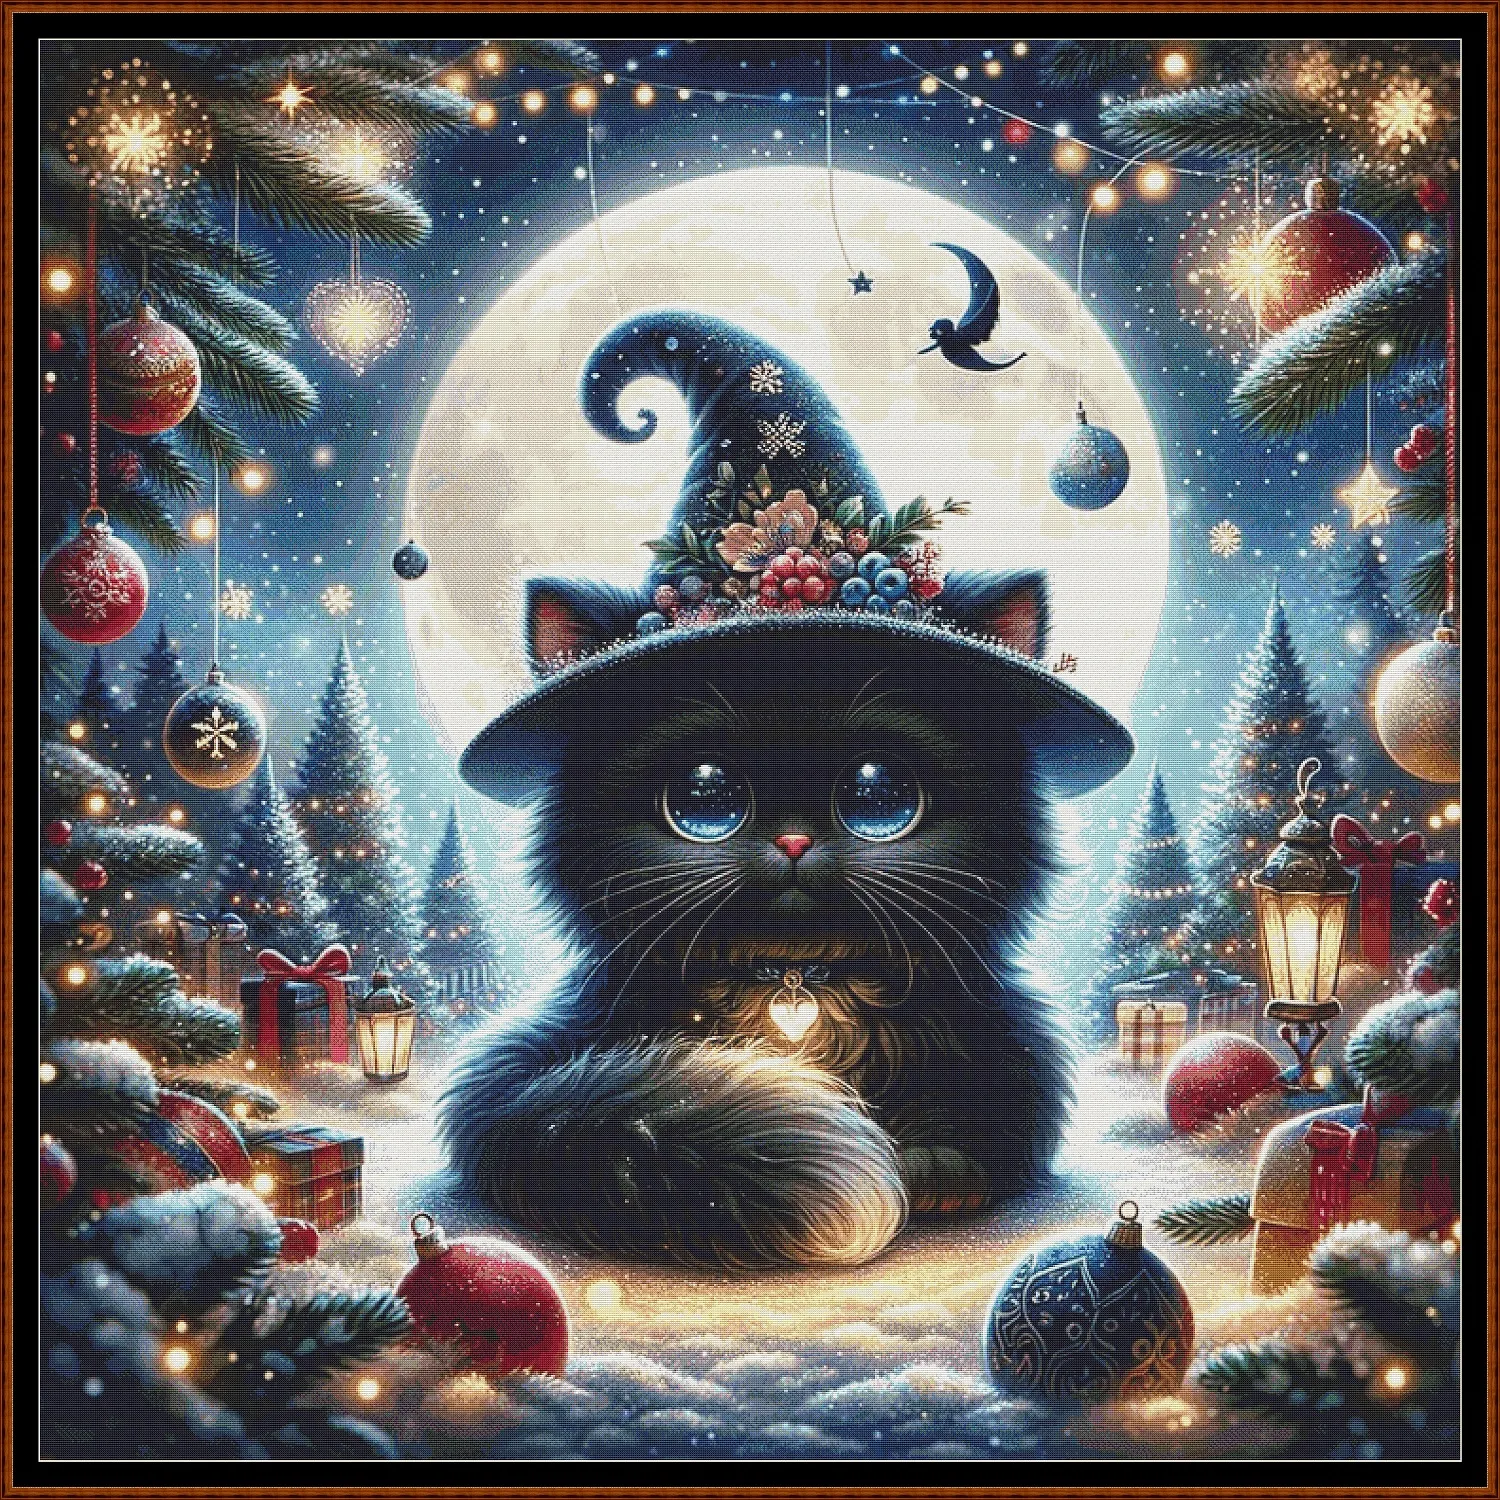 Expertly created from art by Bilal Bashir, under Public Domain CC0 license, Christmas Witchy Kitty cross stitch patterns.